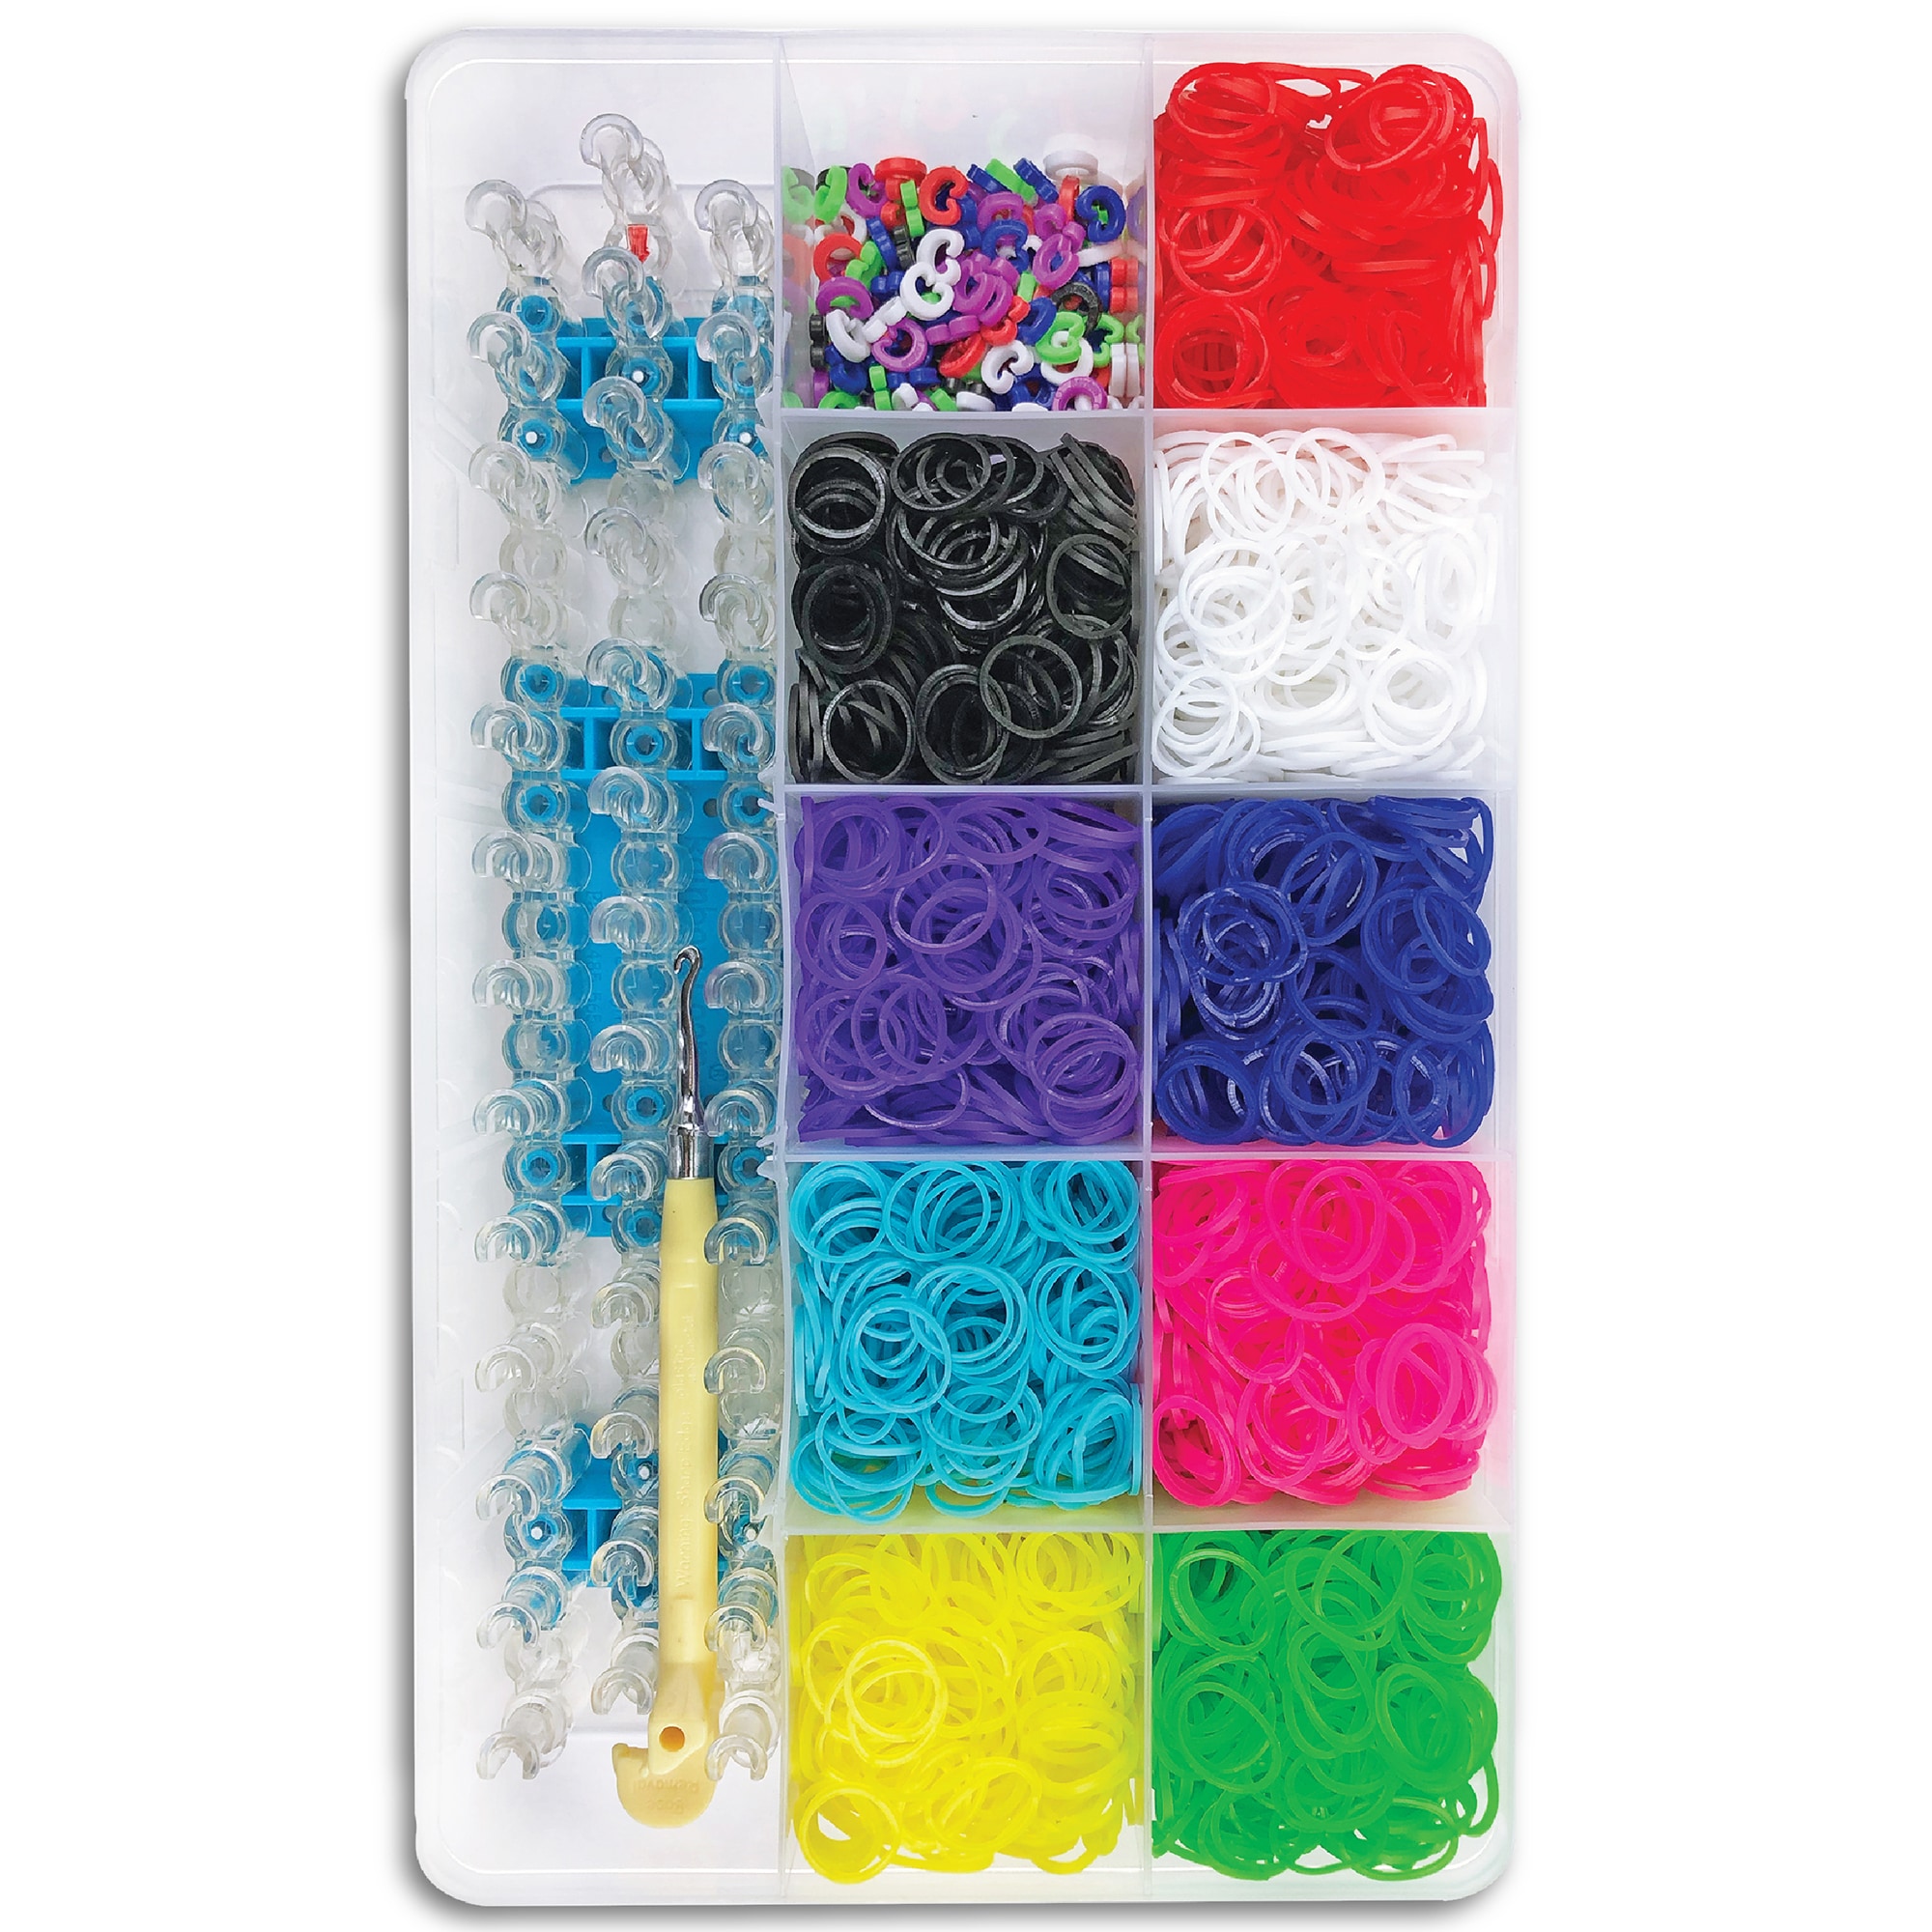 Rainbow Loom Combo Set Bracelet Rubber Band Kit - Creative Play Toy for ...